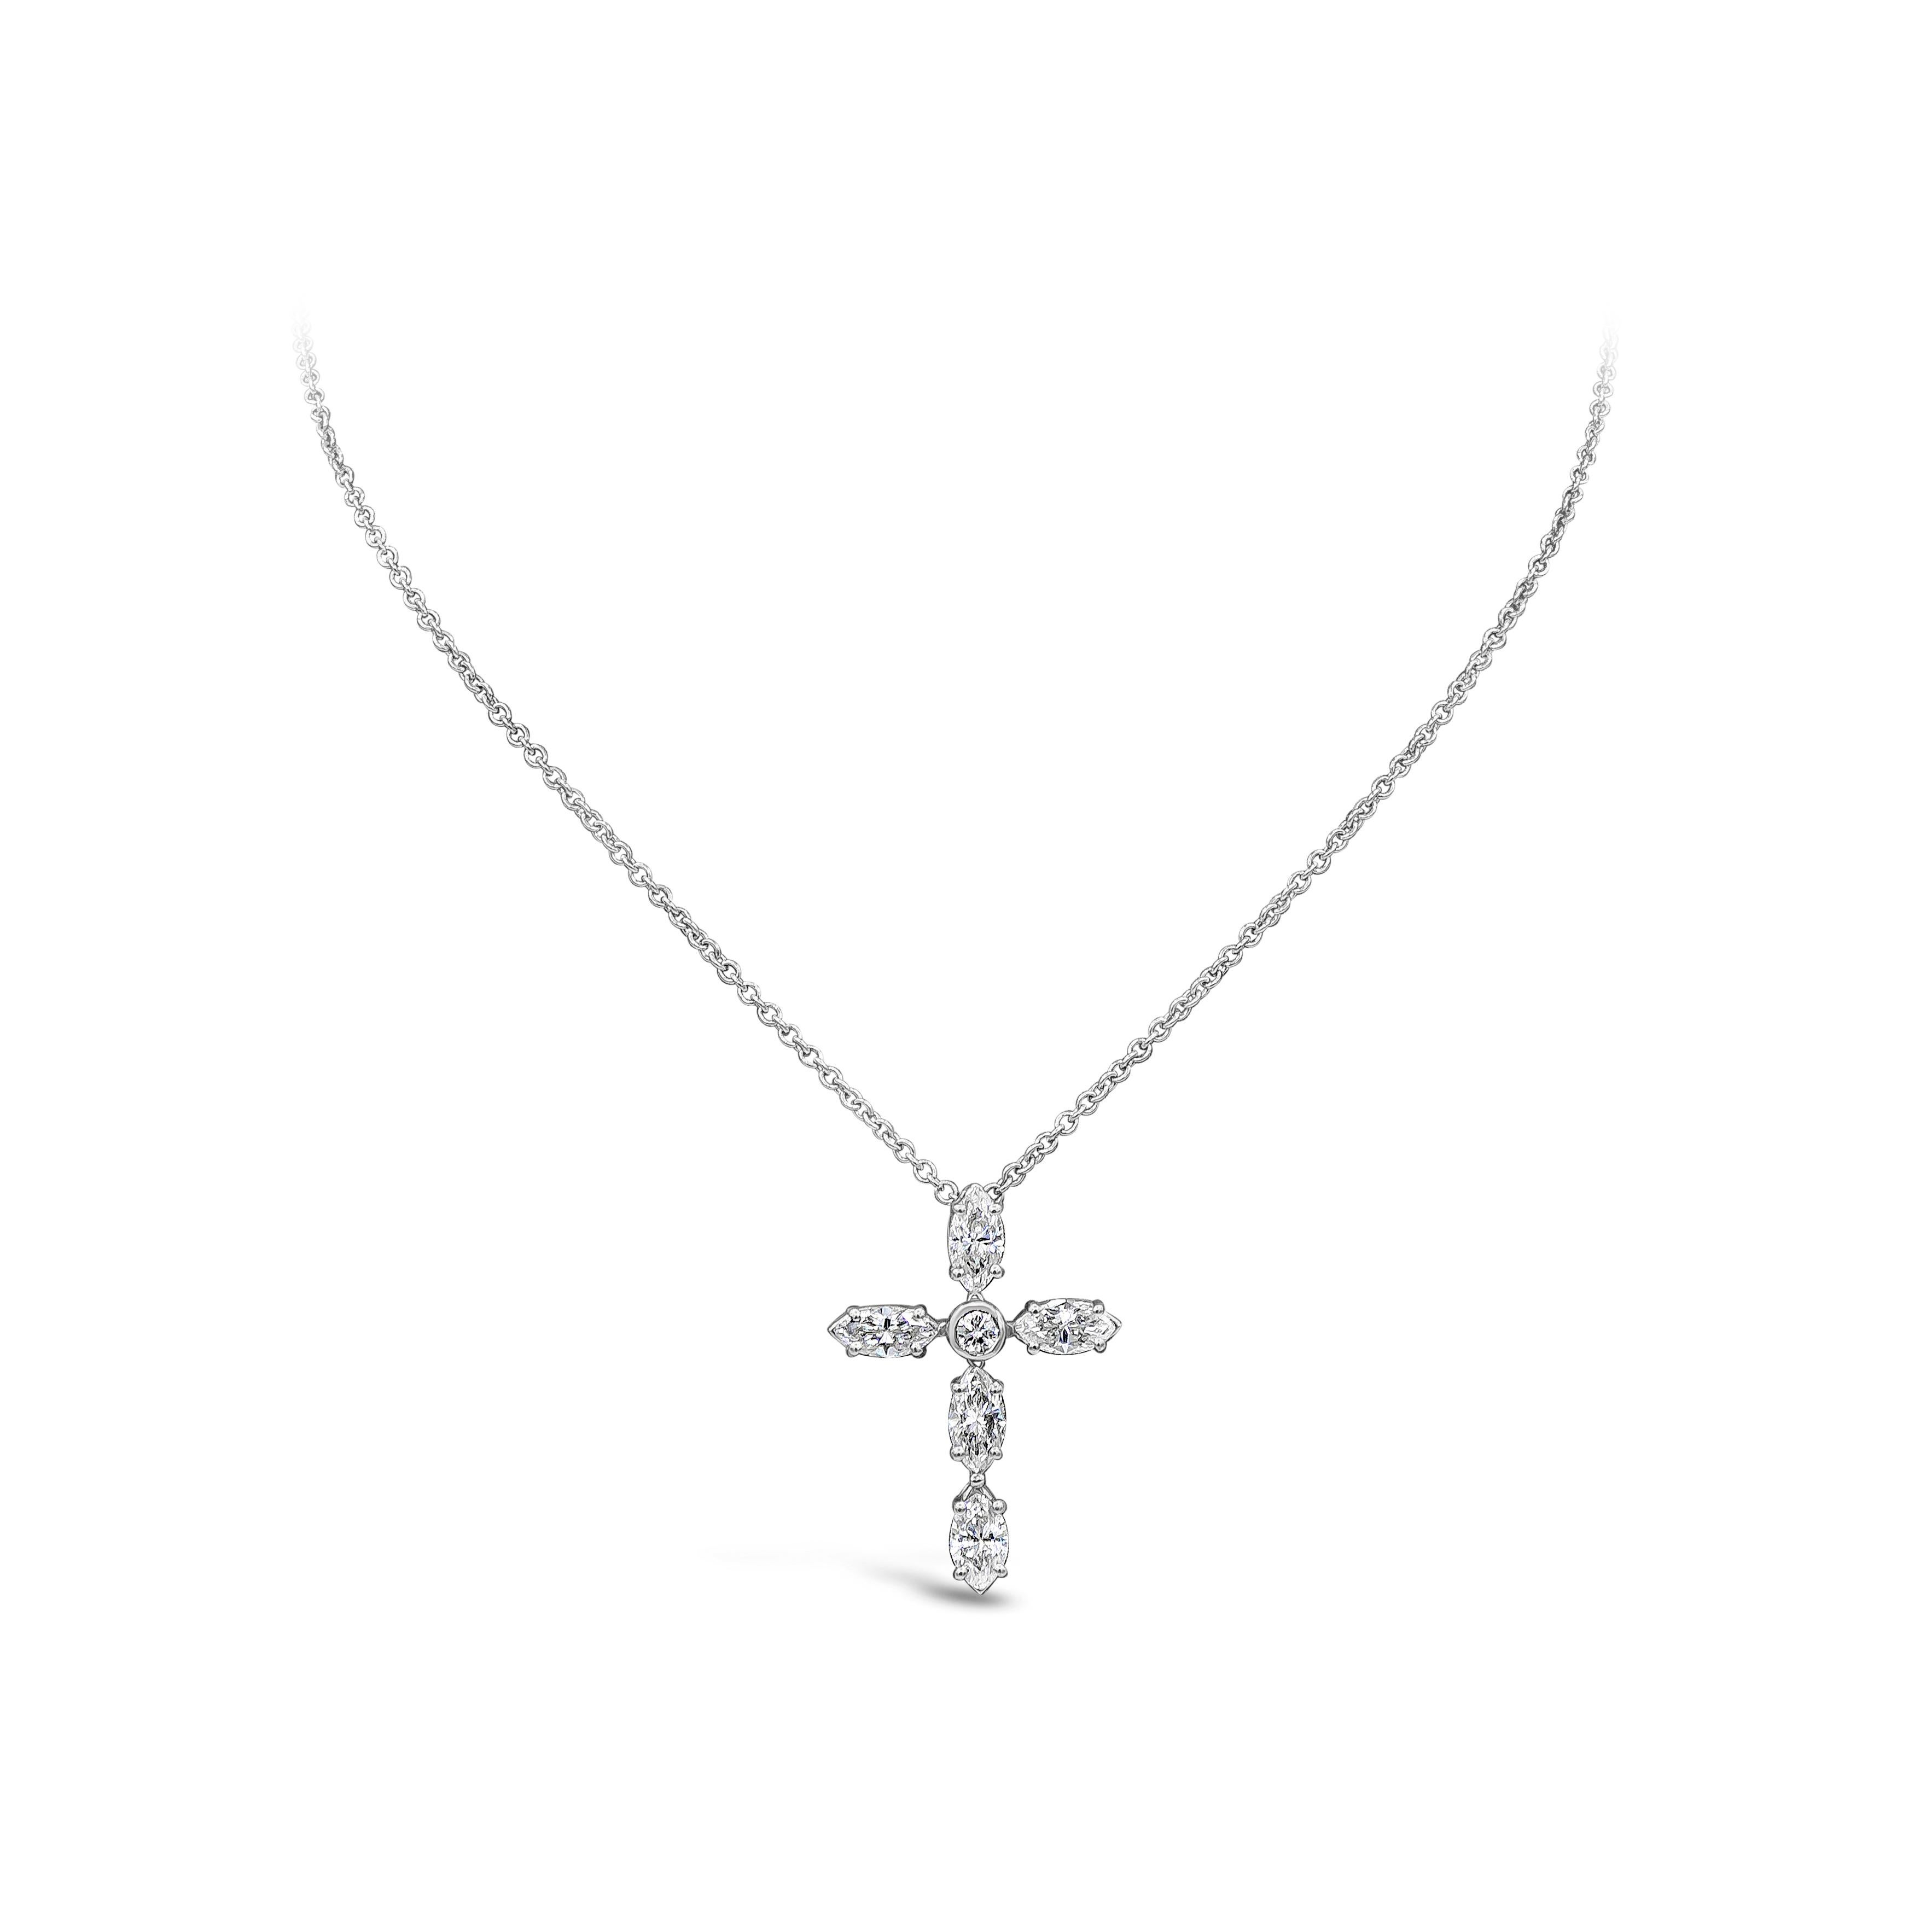 A simple and unique pendant necklace showcasing marquise cut diamonds set in a cross design with a round diamond center. Diamonds weigh 1.77 carats total. Set in a 14k white gold mounting. Suspended on an adjustable 18 inch white gold chain.

Style